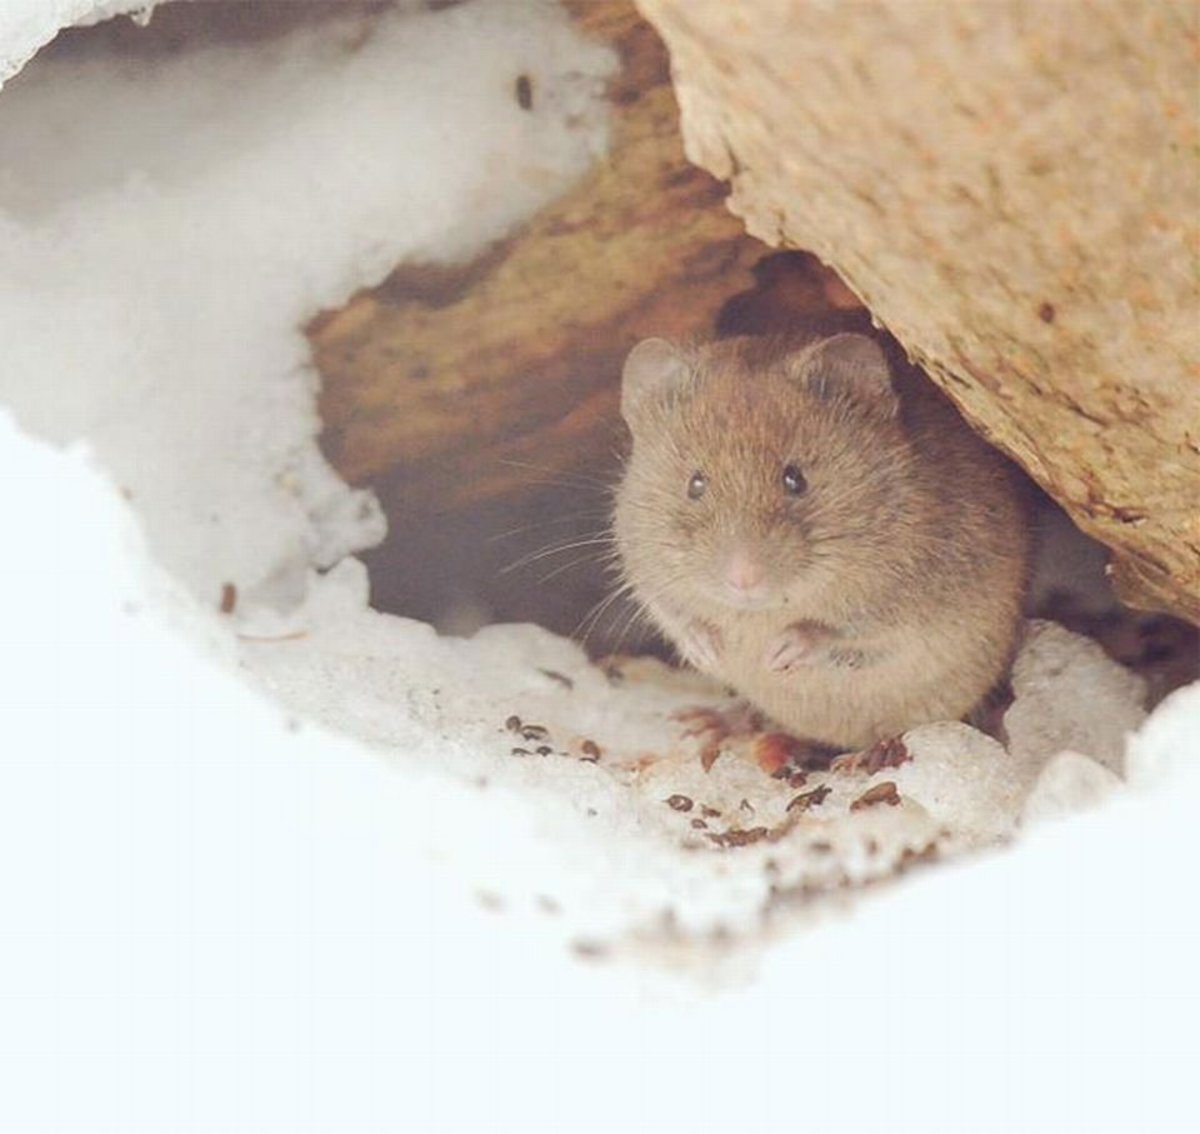 The pika are adept at burrowing through snow.